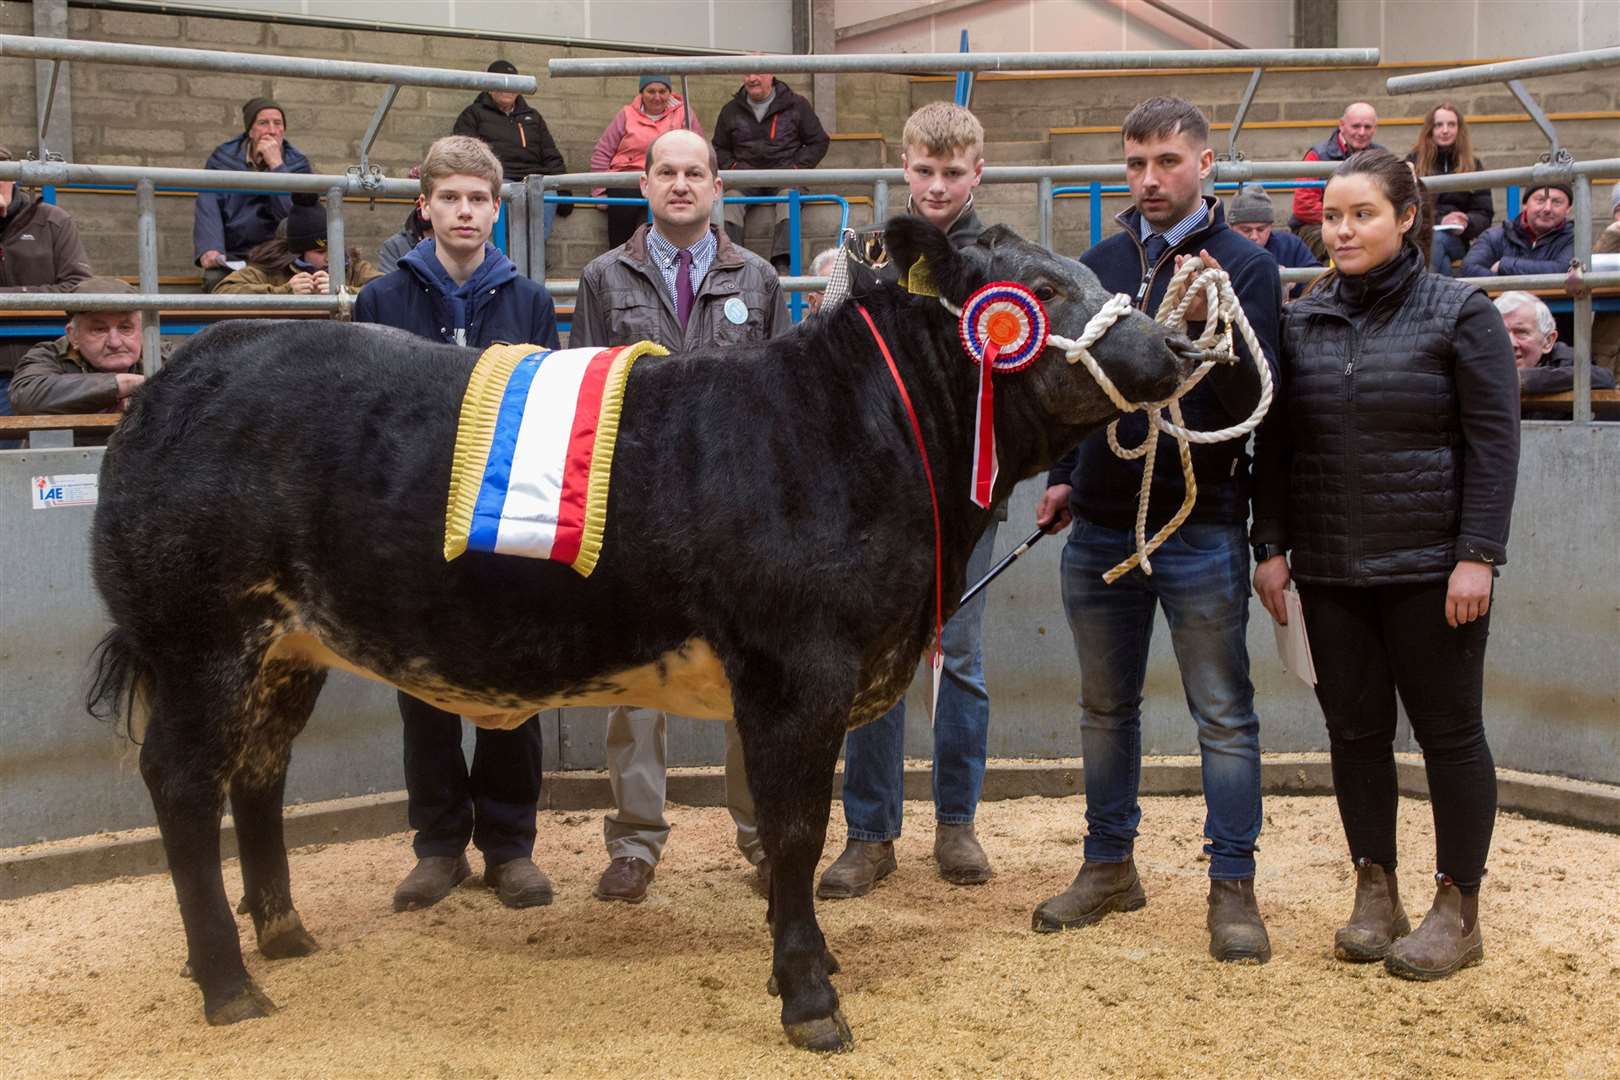 Hannah Levack, Dunbeath Mains, with her champion Limousin cross heifer at the Young Farmers' overwintered championship. Holding the animal is her partner Kris Sutherland, while looking on are show judge Angus Greenlaw (back, centre), who purchased the champion, and Iain (left) and Dhaill Mackay, representing the show sponsors, Messrs A H Mackay, West Greenland. Picture: Robert MacDonald / Northern Studios